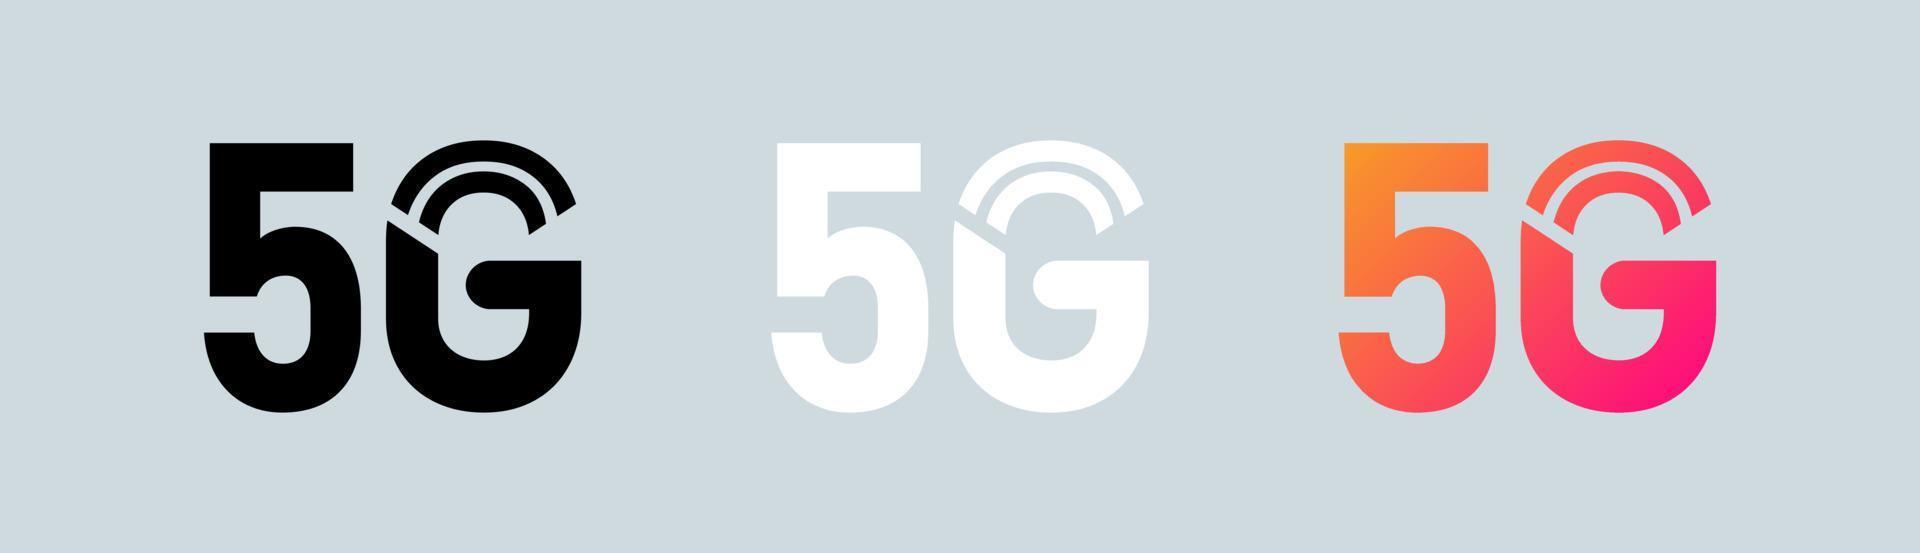 5G network technology icon logo concept. Fifth generation wireless internet symbol. vector